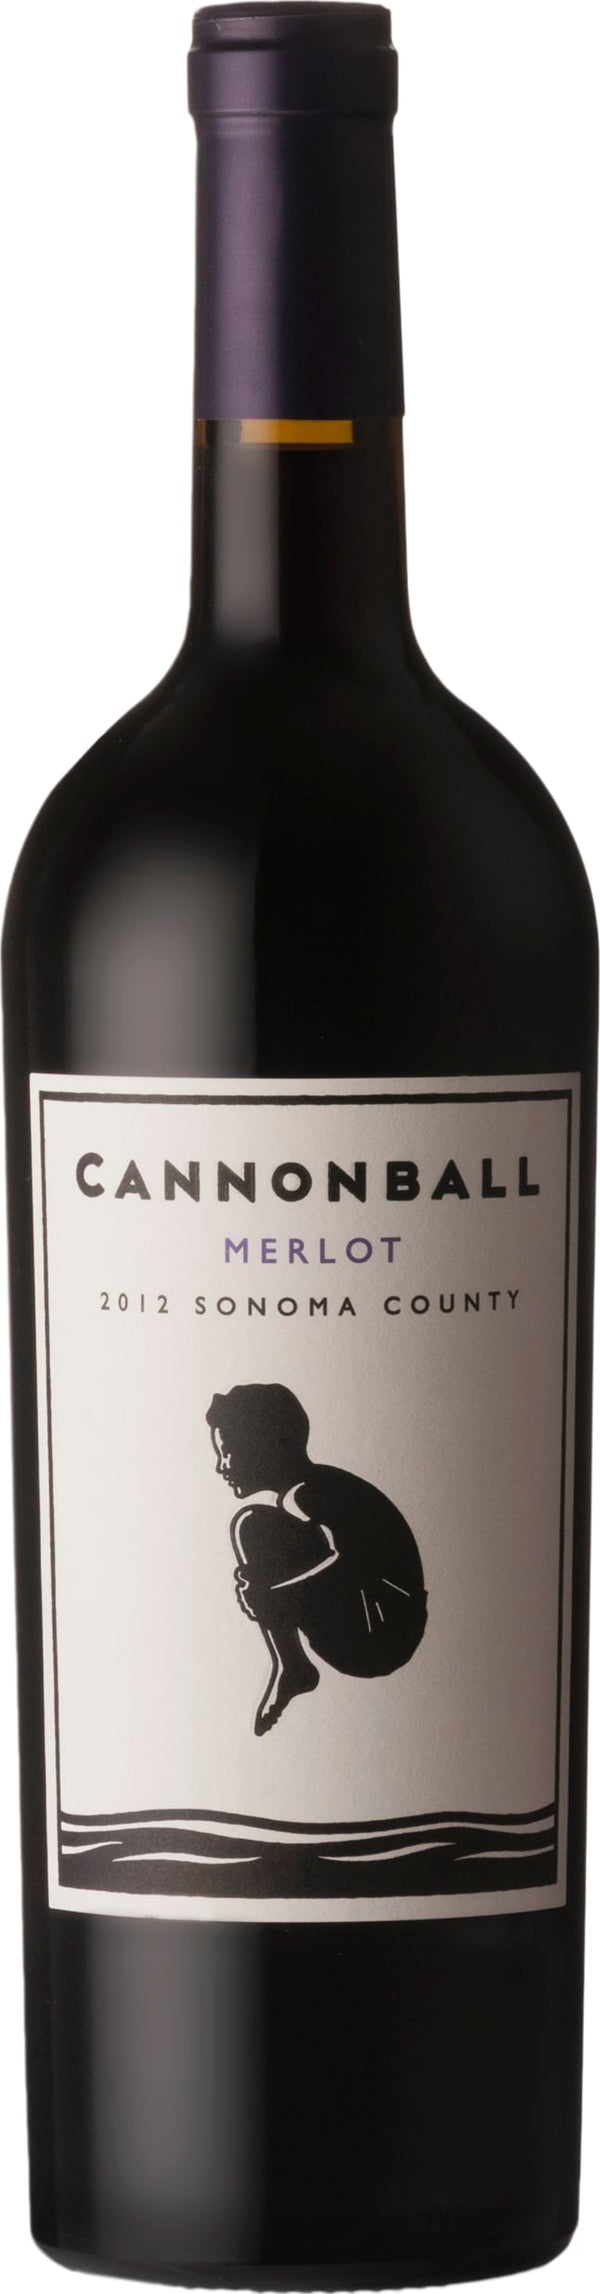 Cannonball Merlot 2020 6x75cl - Just Wines 